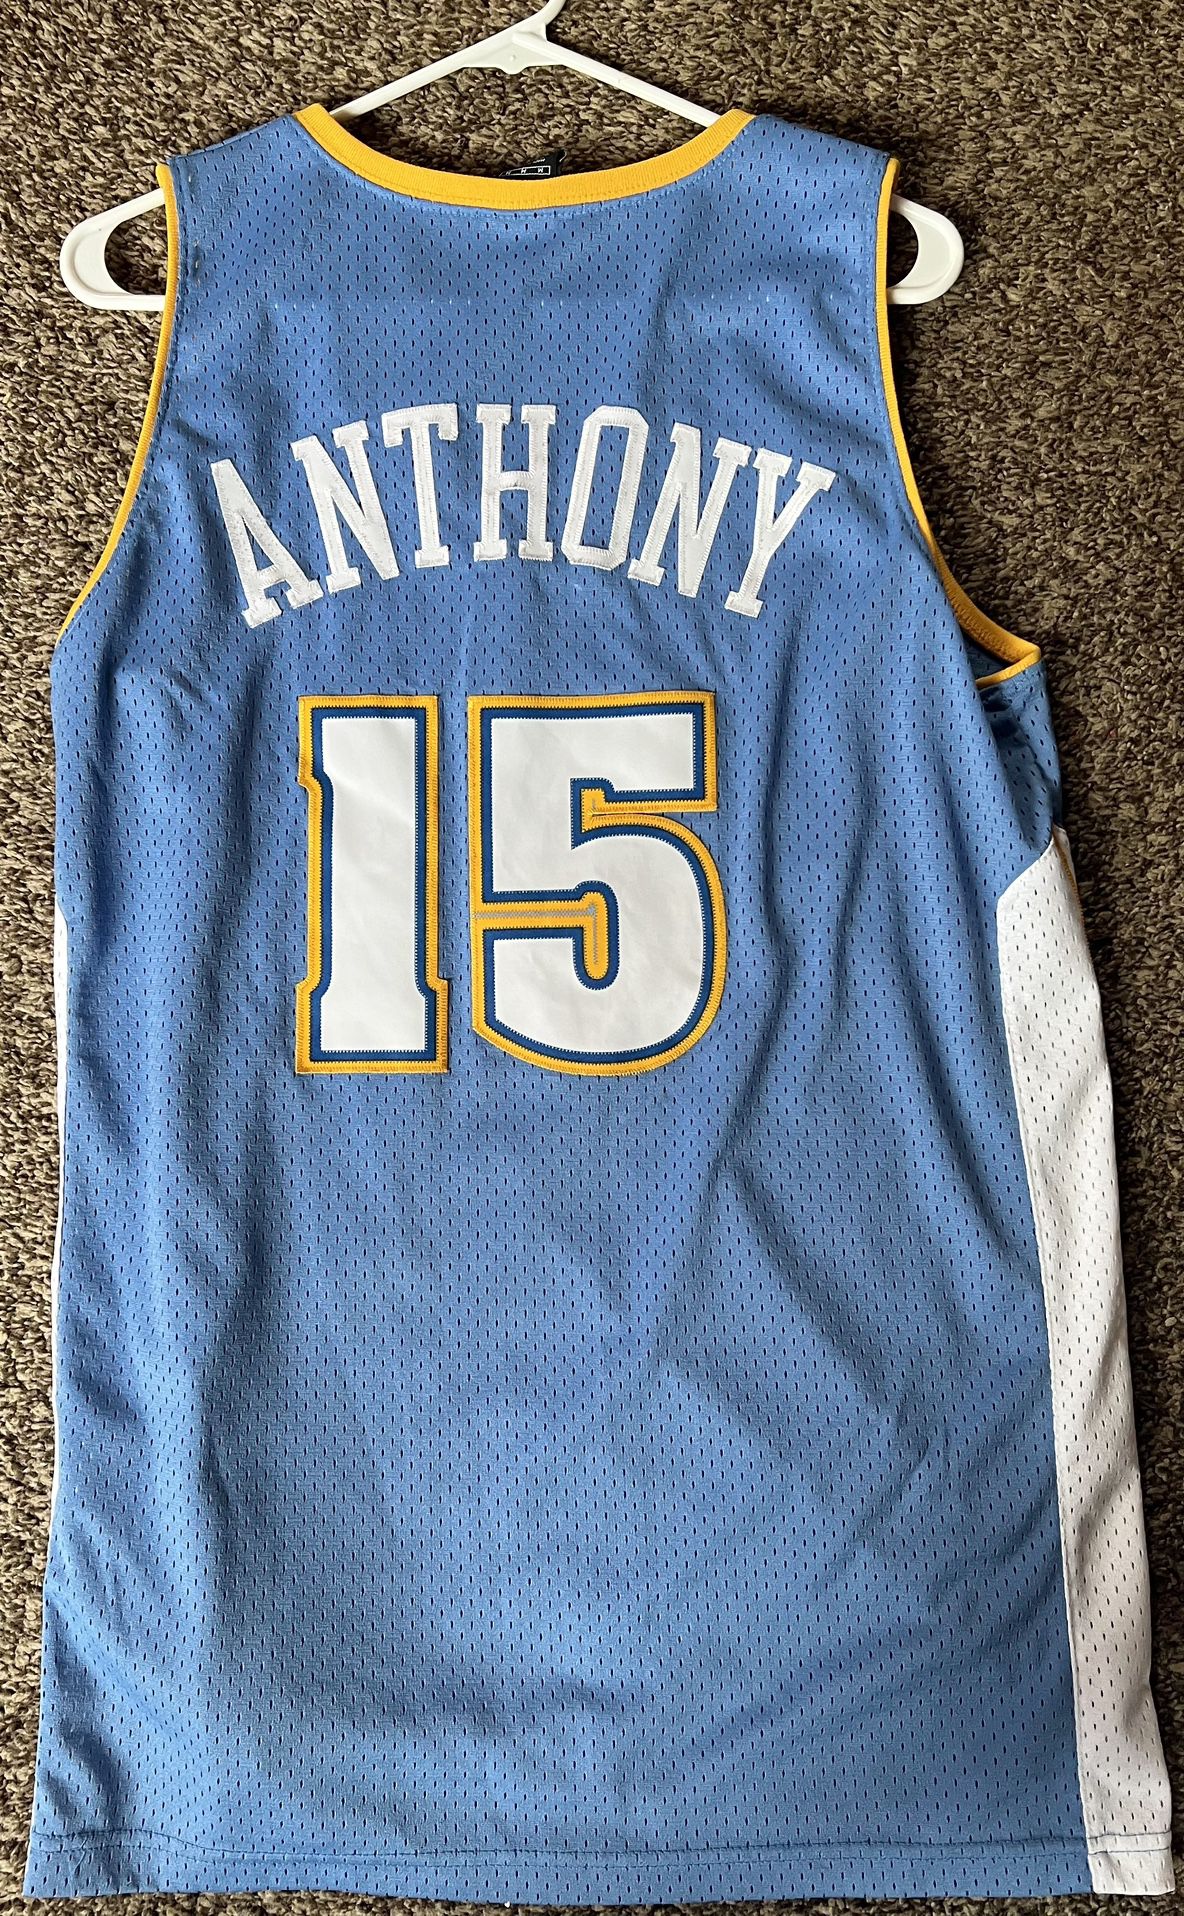 Denver Nuggets Carmelo Anthony Jersey for Sale in Colorado